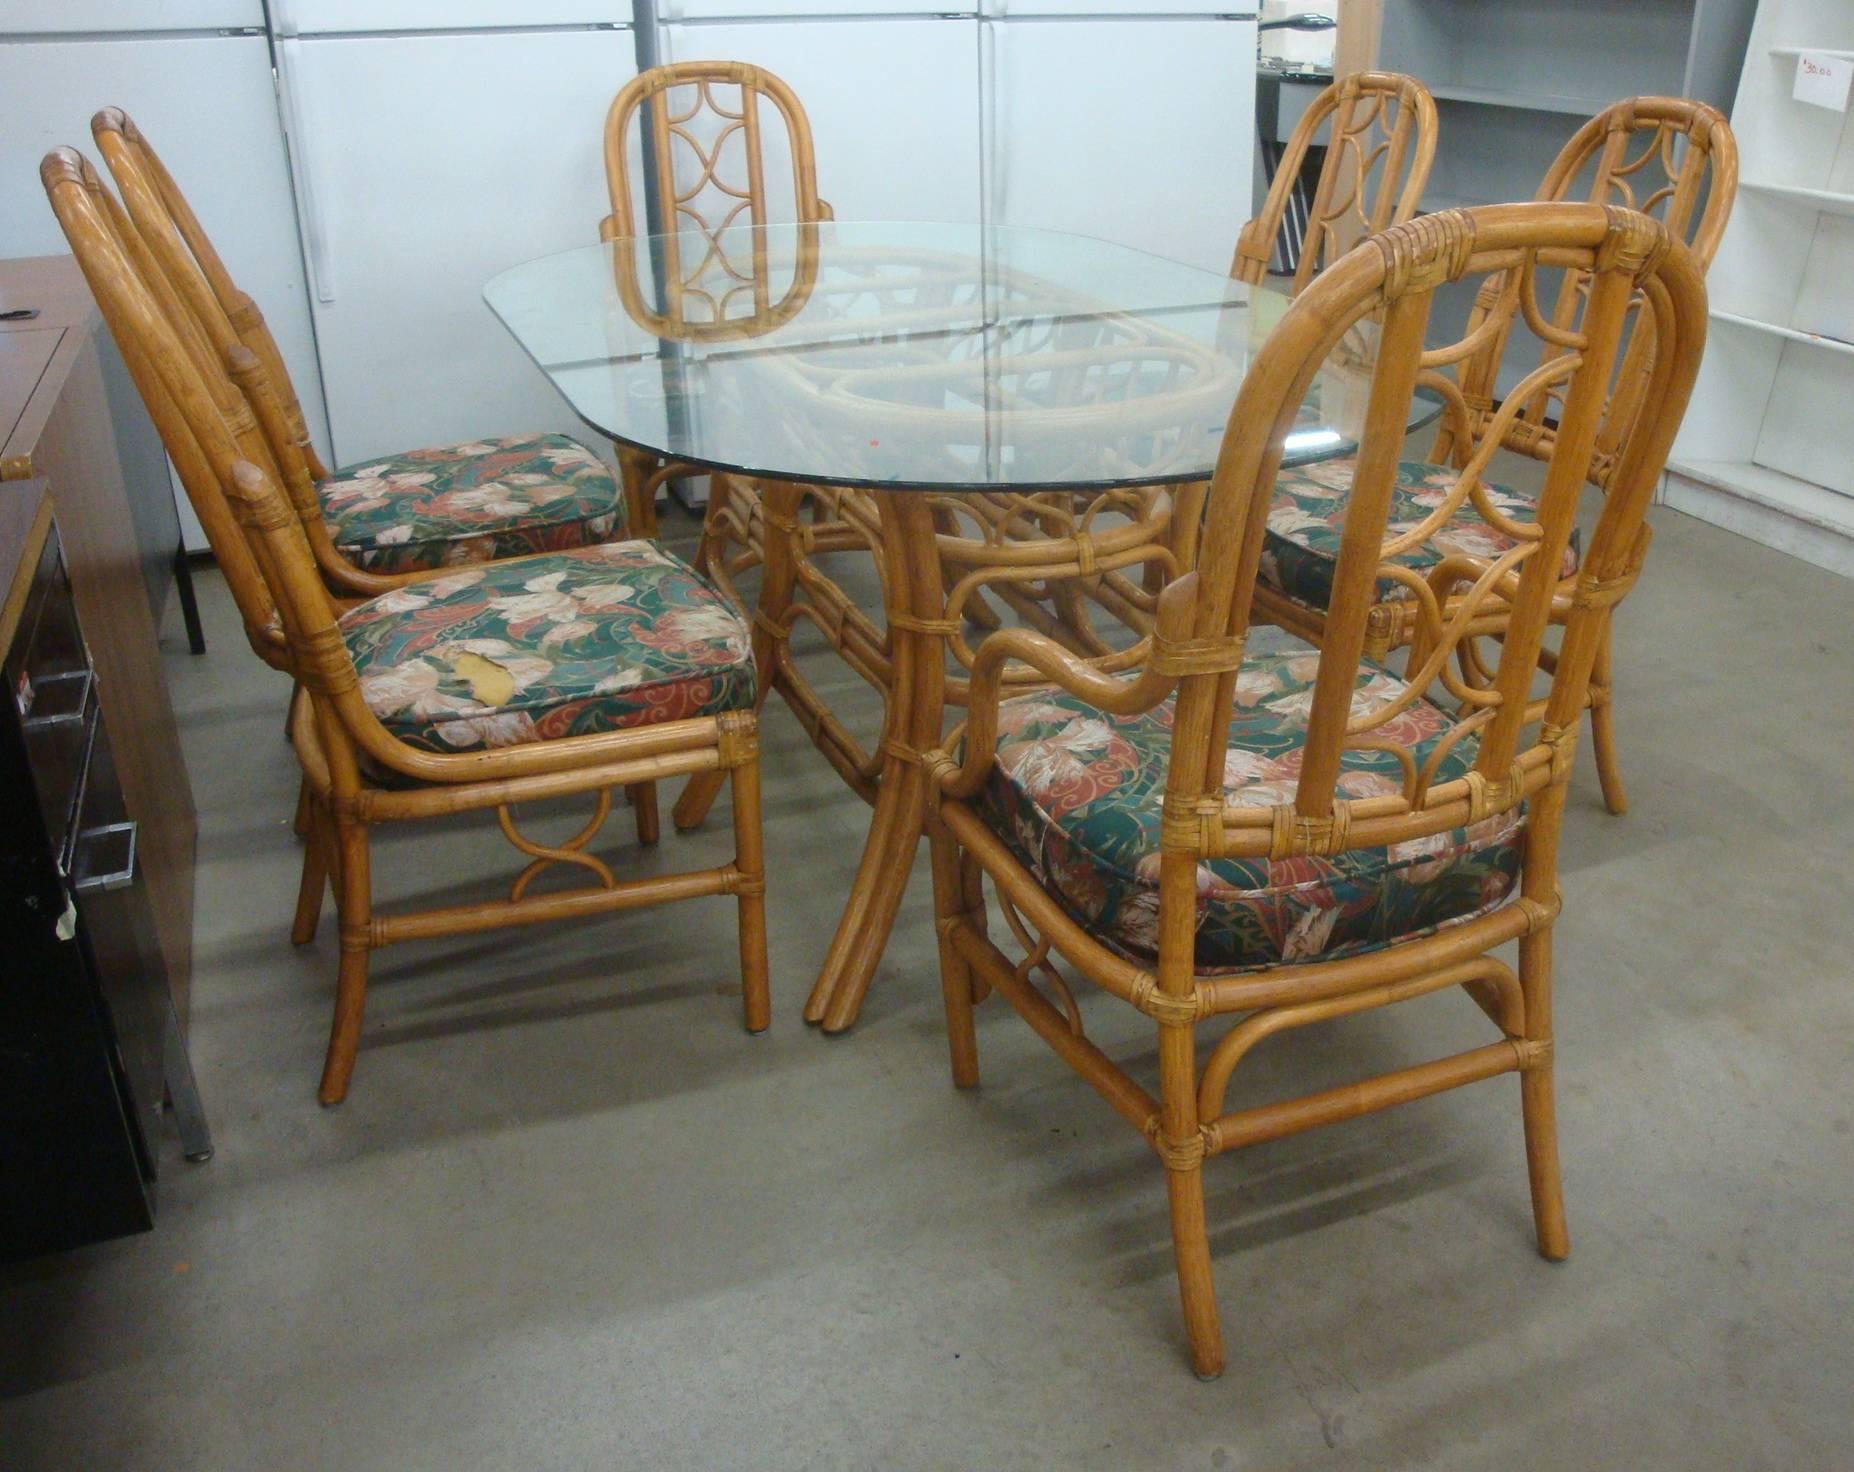 Offered is a fabulous, 1970s set of sturdy rattan McGuire or Ficks Reed style dining set. Stunning leather wrapped joints and curving trellis style details in the chair backs and skirts. Includes four side chairs, and two armchairs. Oval glass top